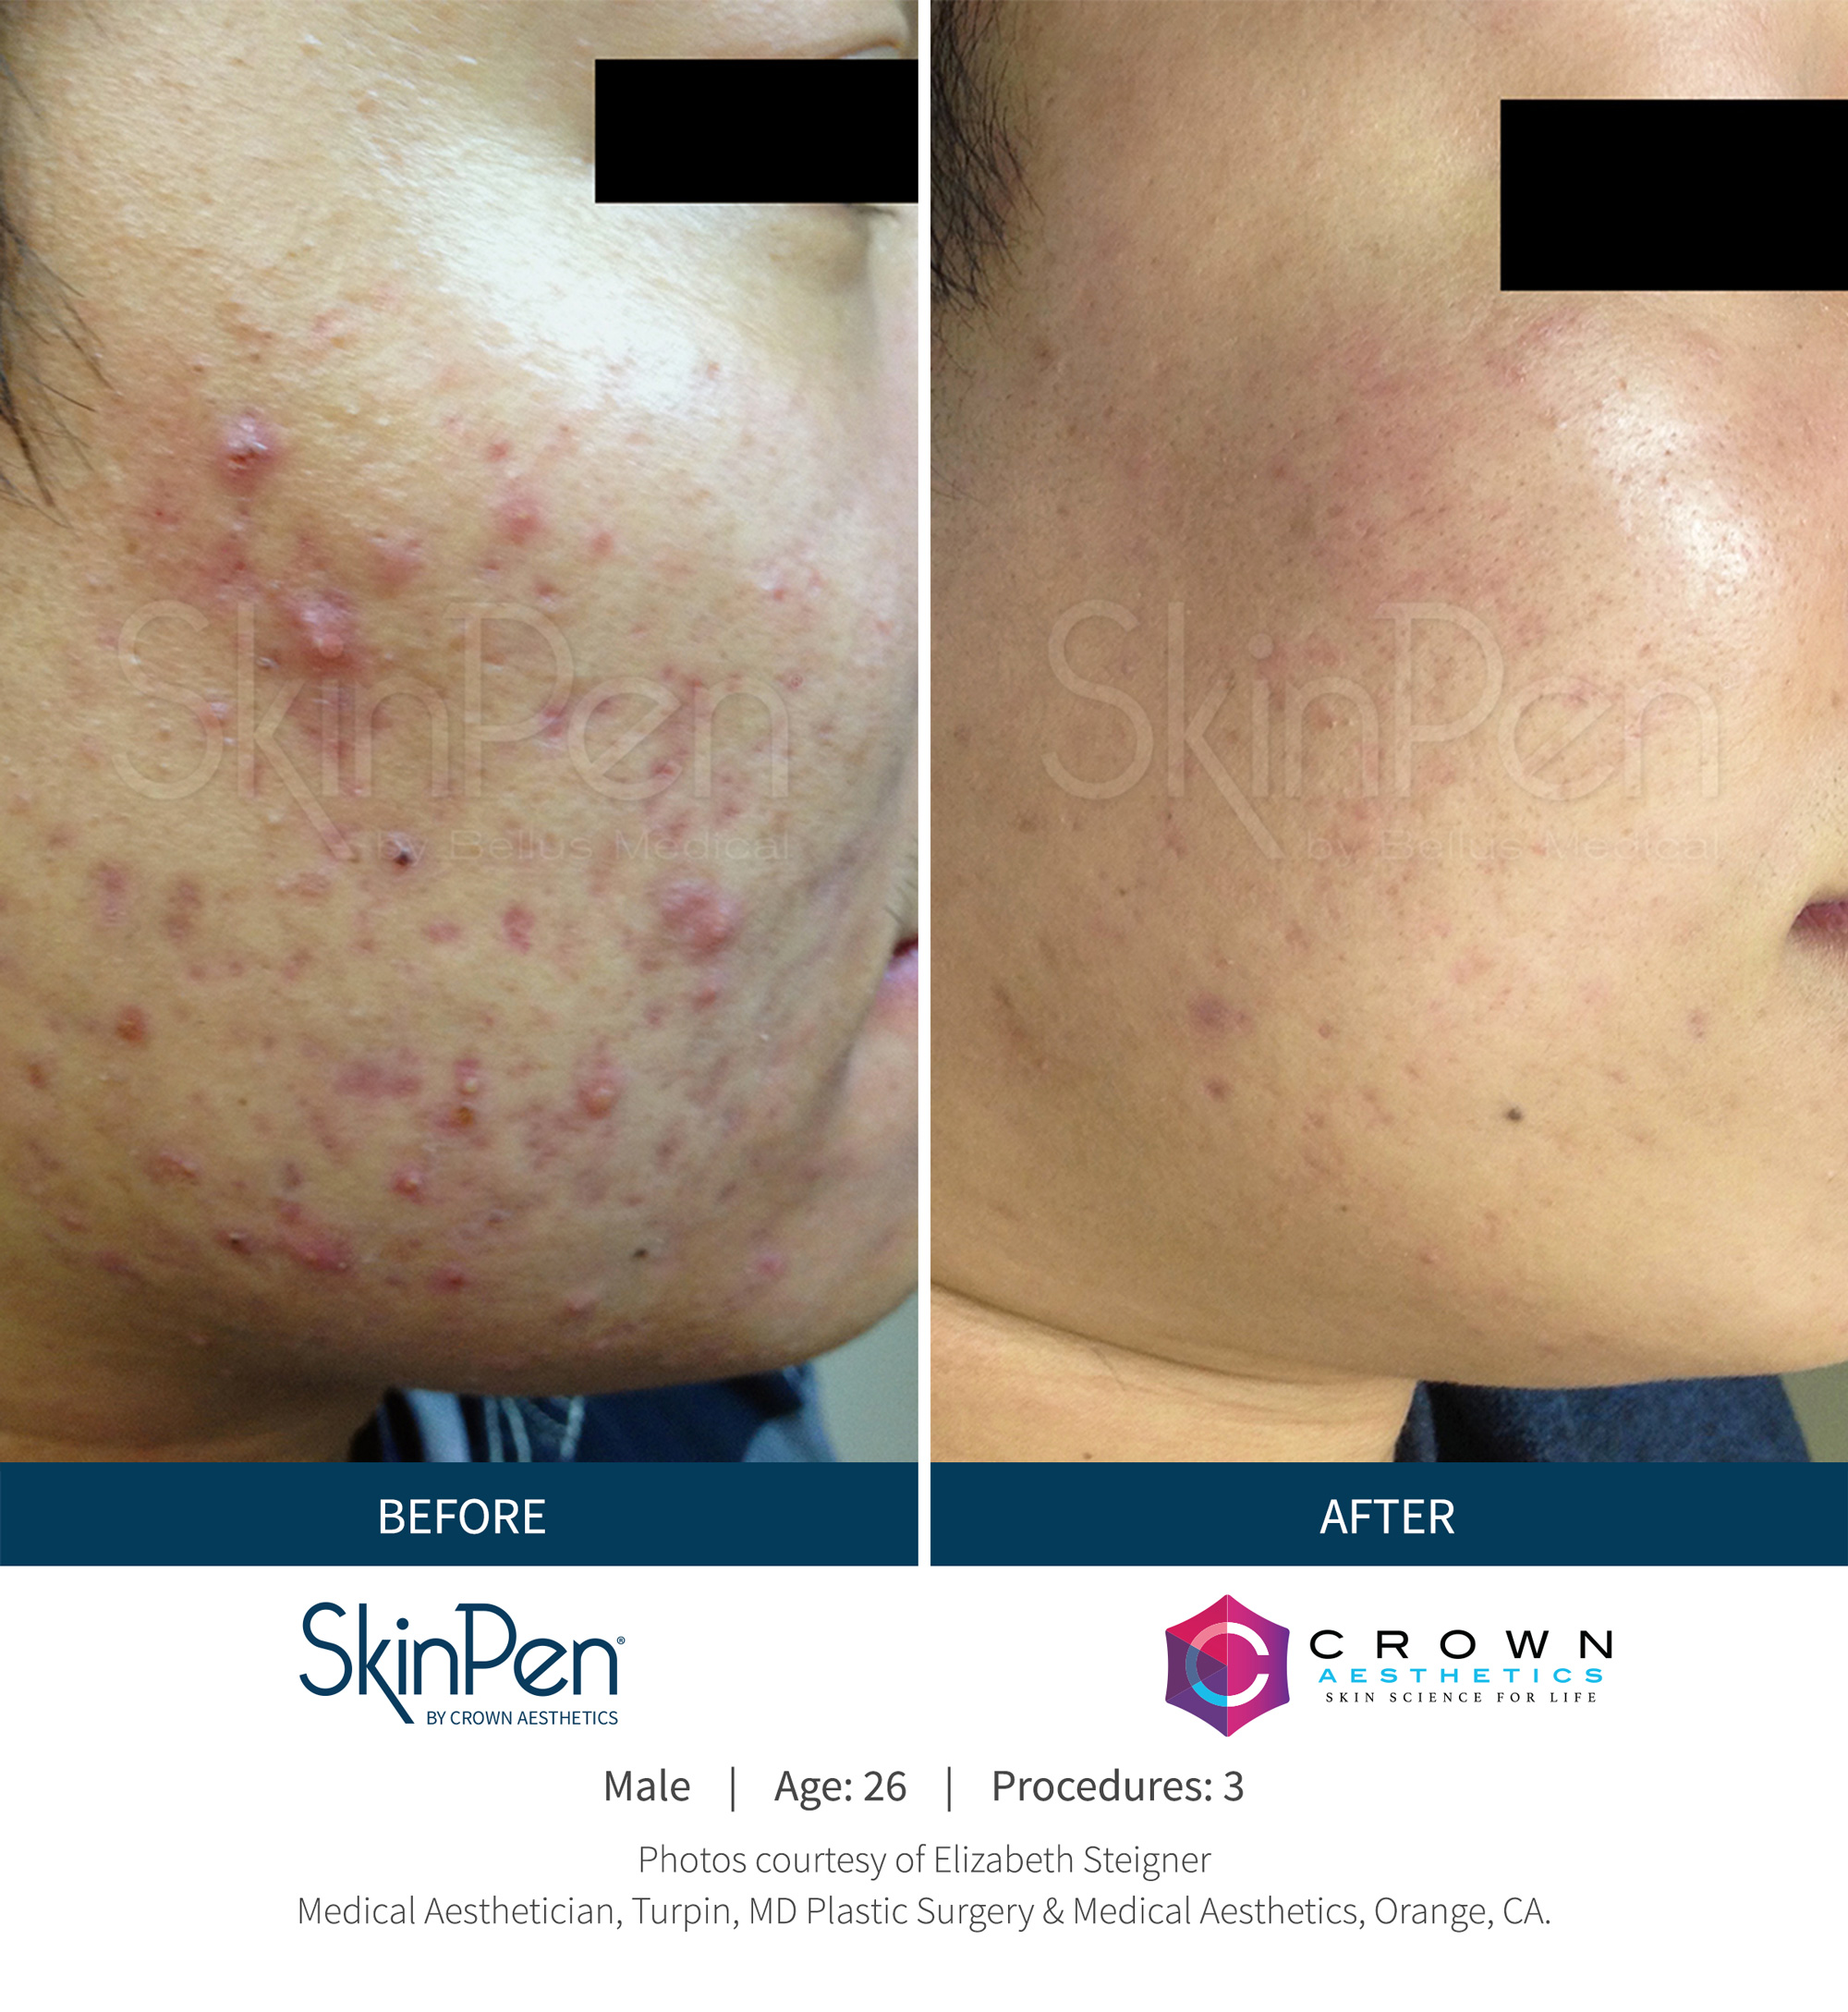 SkinPen before and after picture microneedling